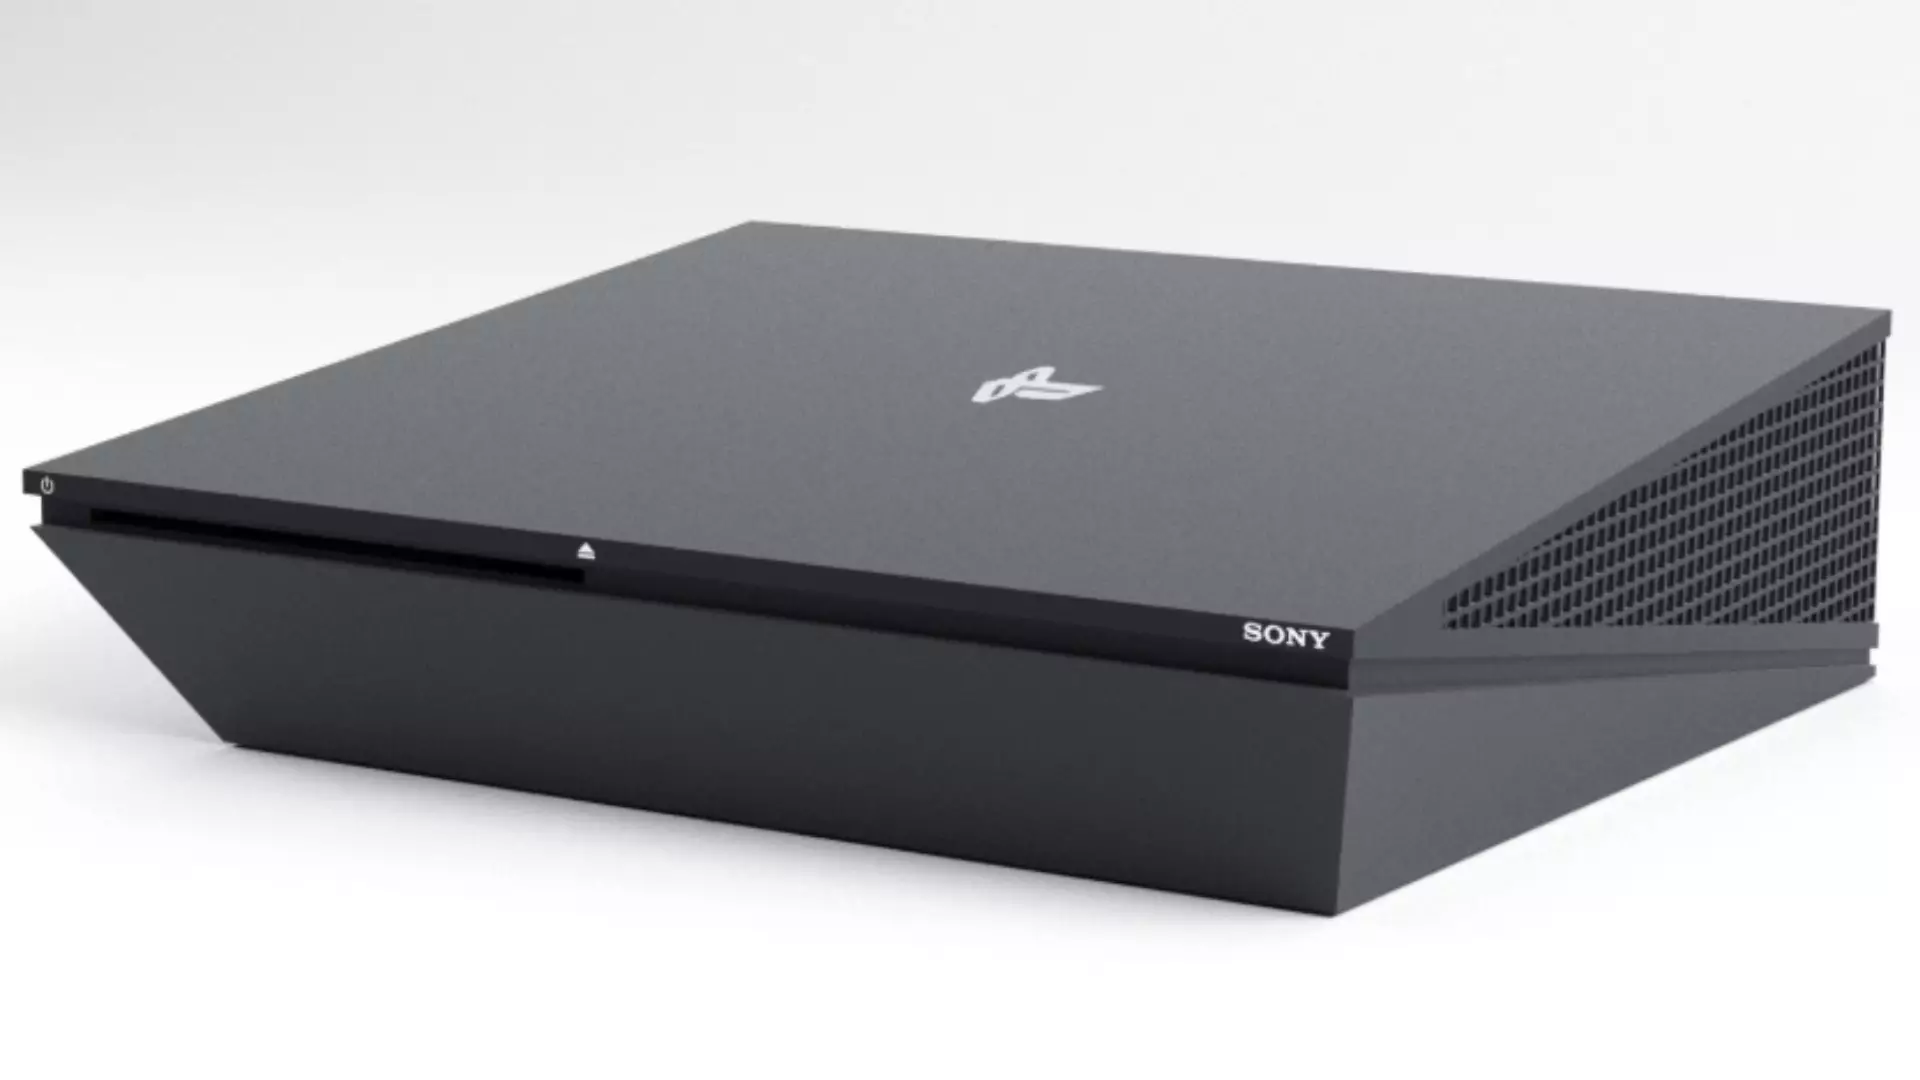 Fan’s PlayStation 5 Renders Drop Online To Show Off Potential Console Design